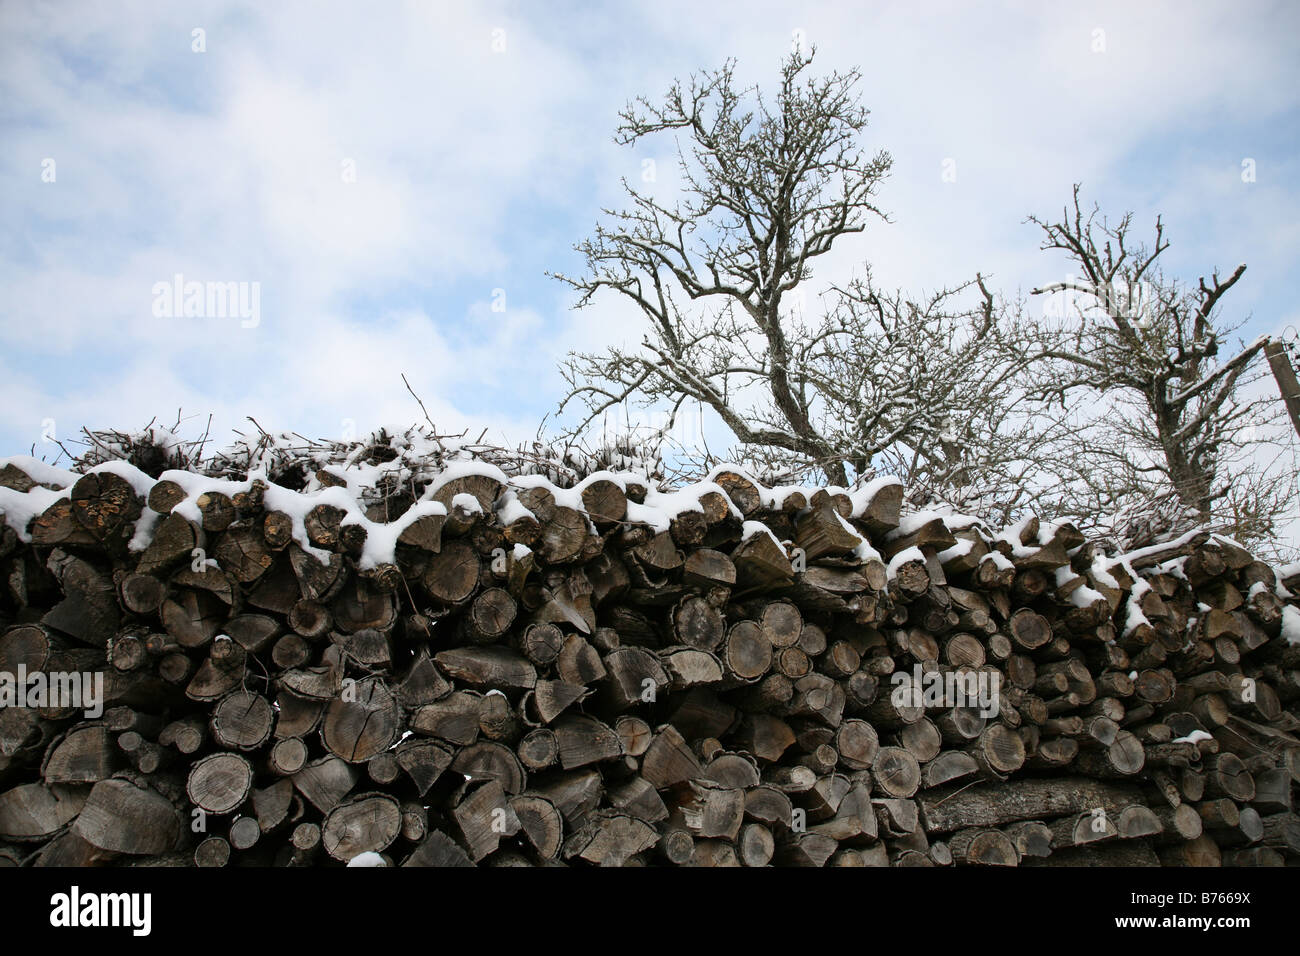 A large pile of logs stacked up and covered in snow Stock Photo